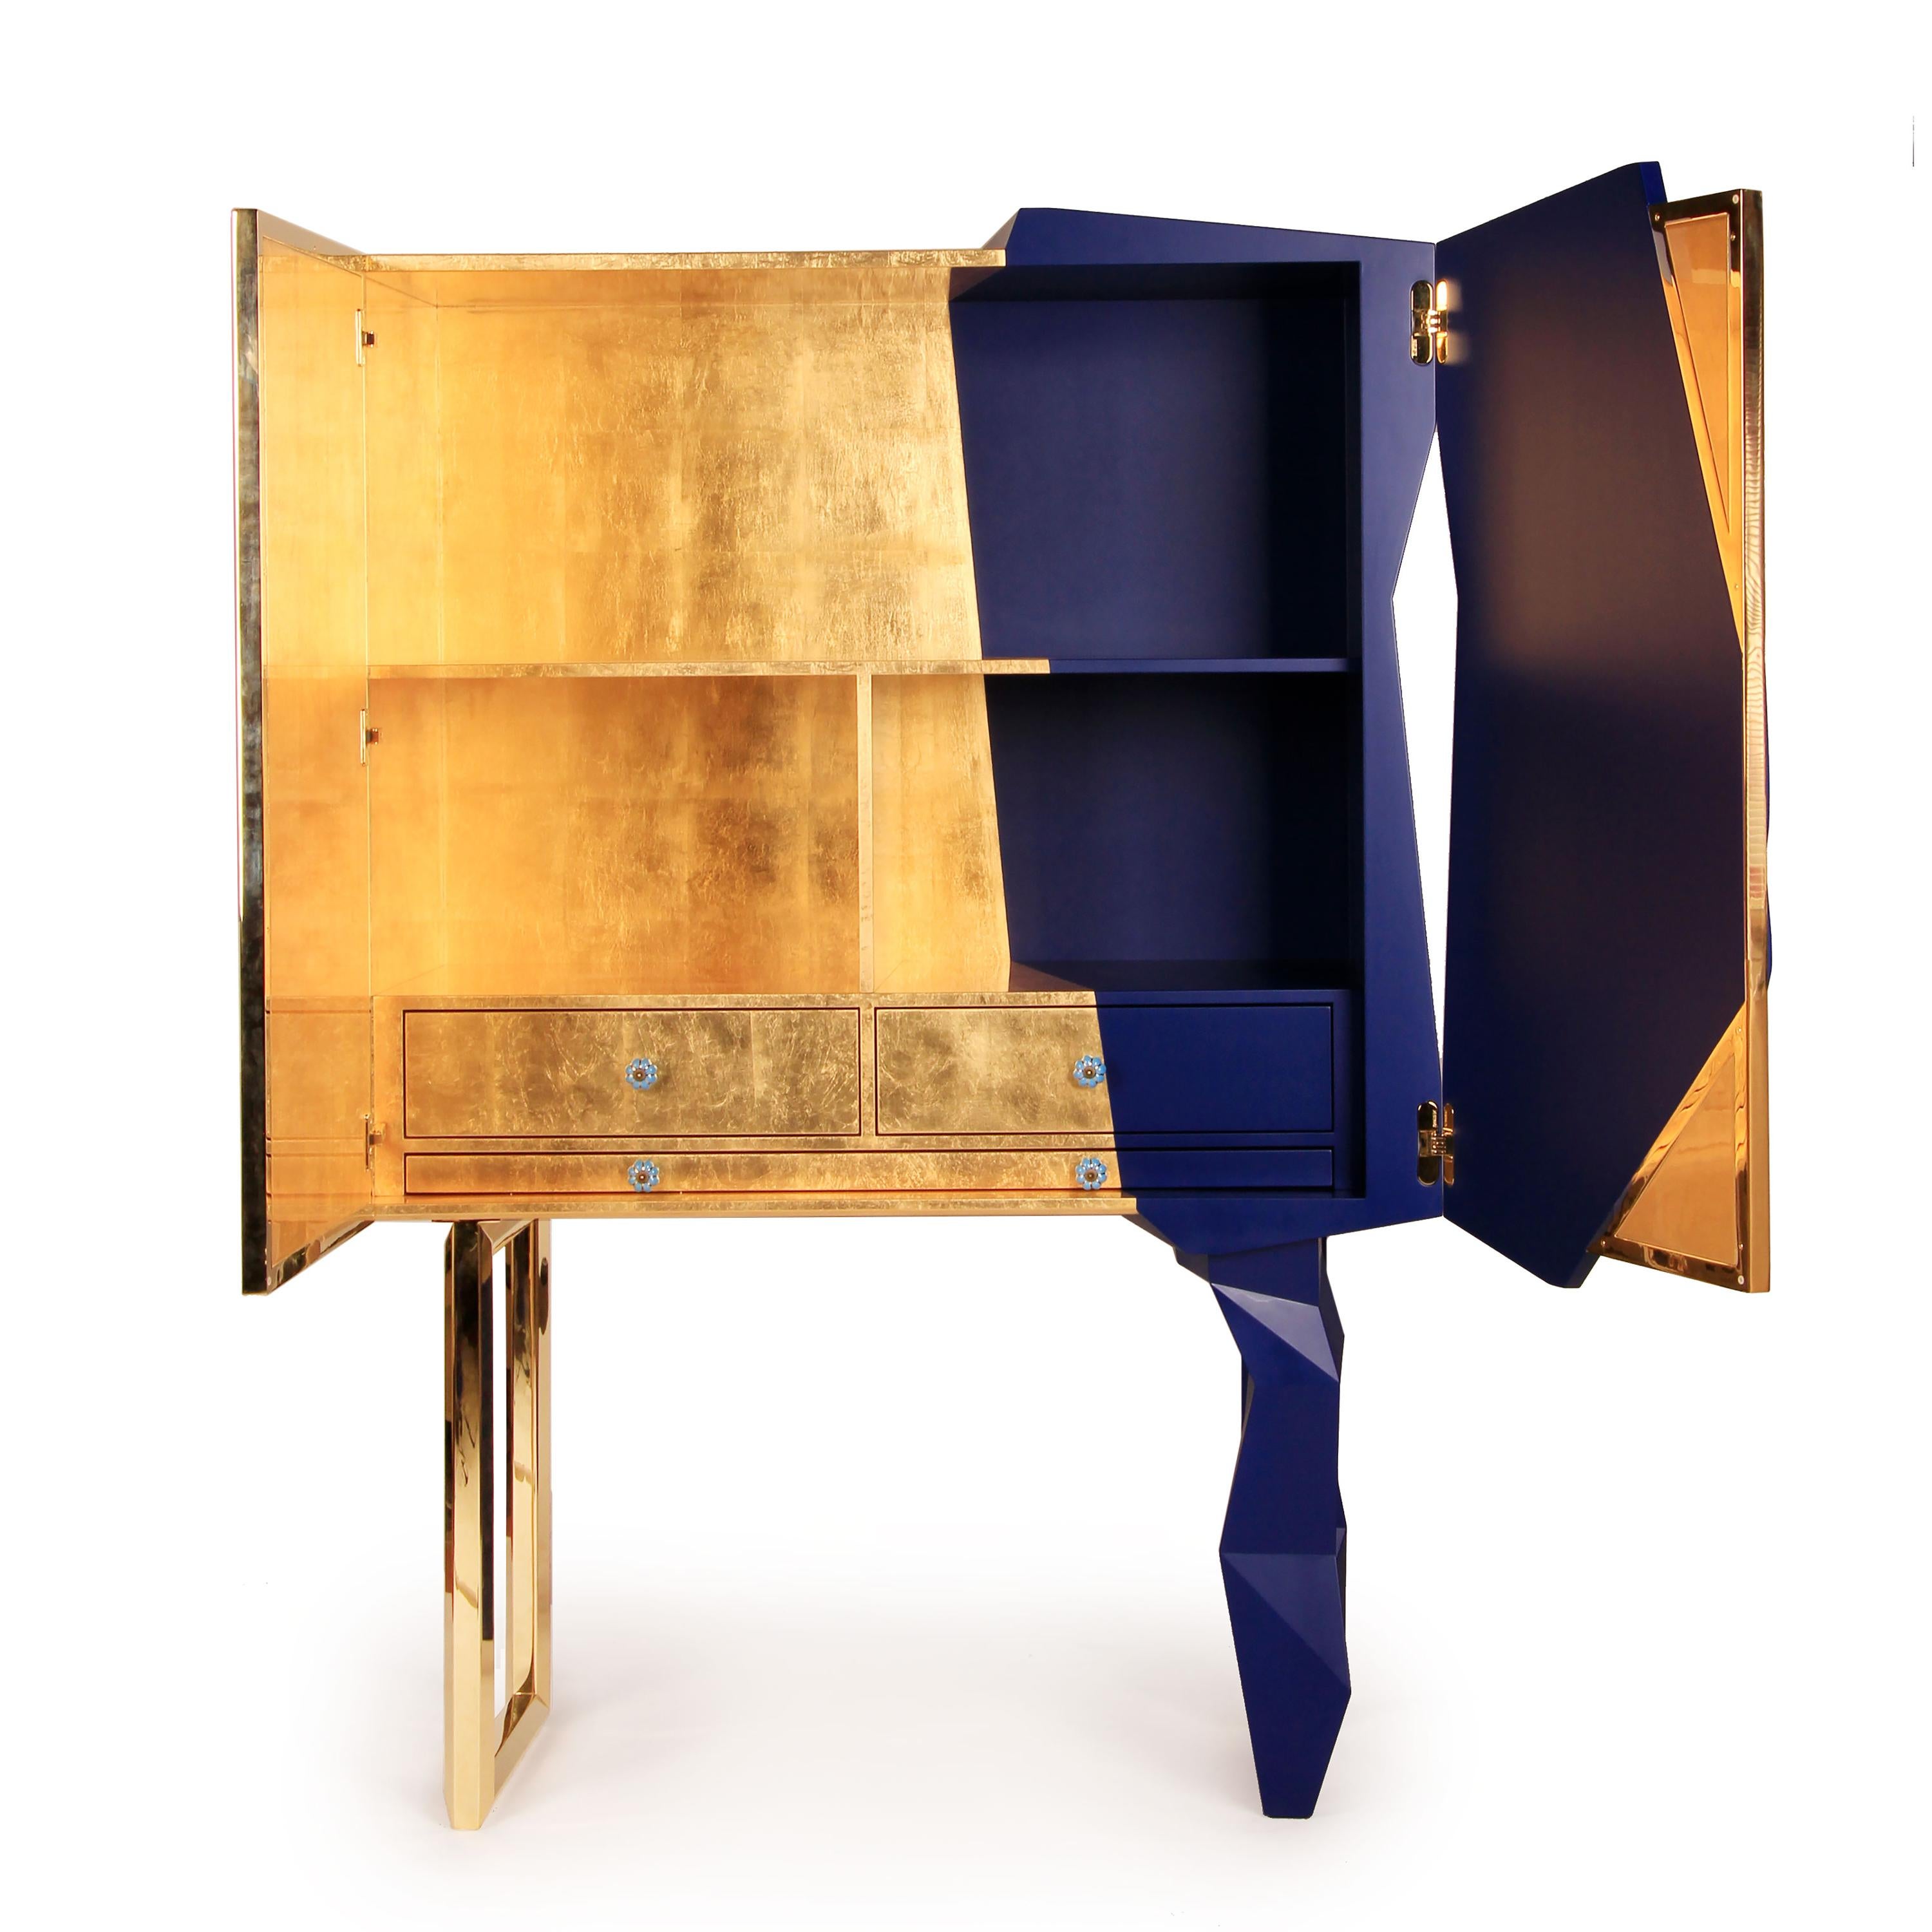 Honeycomb blue and gold leaf cabinet - Royal Stranger.
Dimensions: 185 x 126 x 60 cm.
Materials: Black pearl color combination with gold leaf and stainless steel coated in brass.

Inspired by one of the most intrinsic forms of nature, this